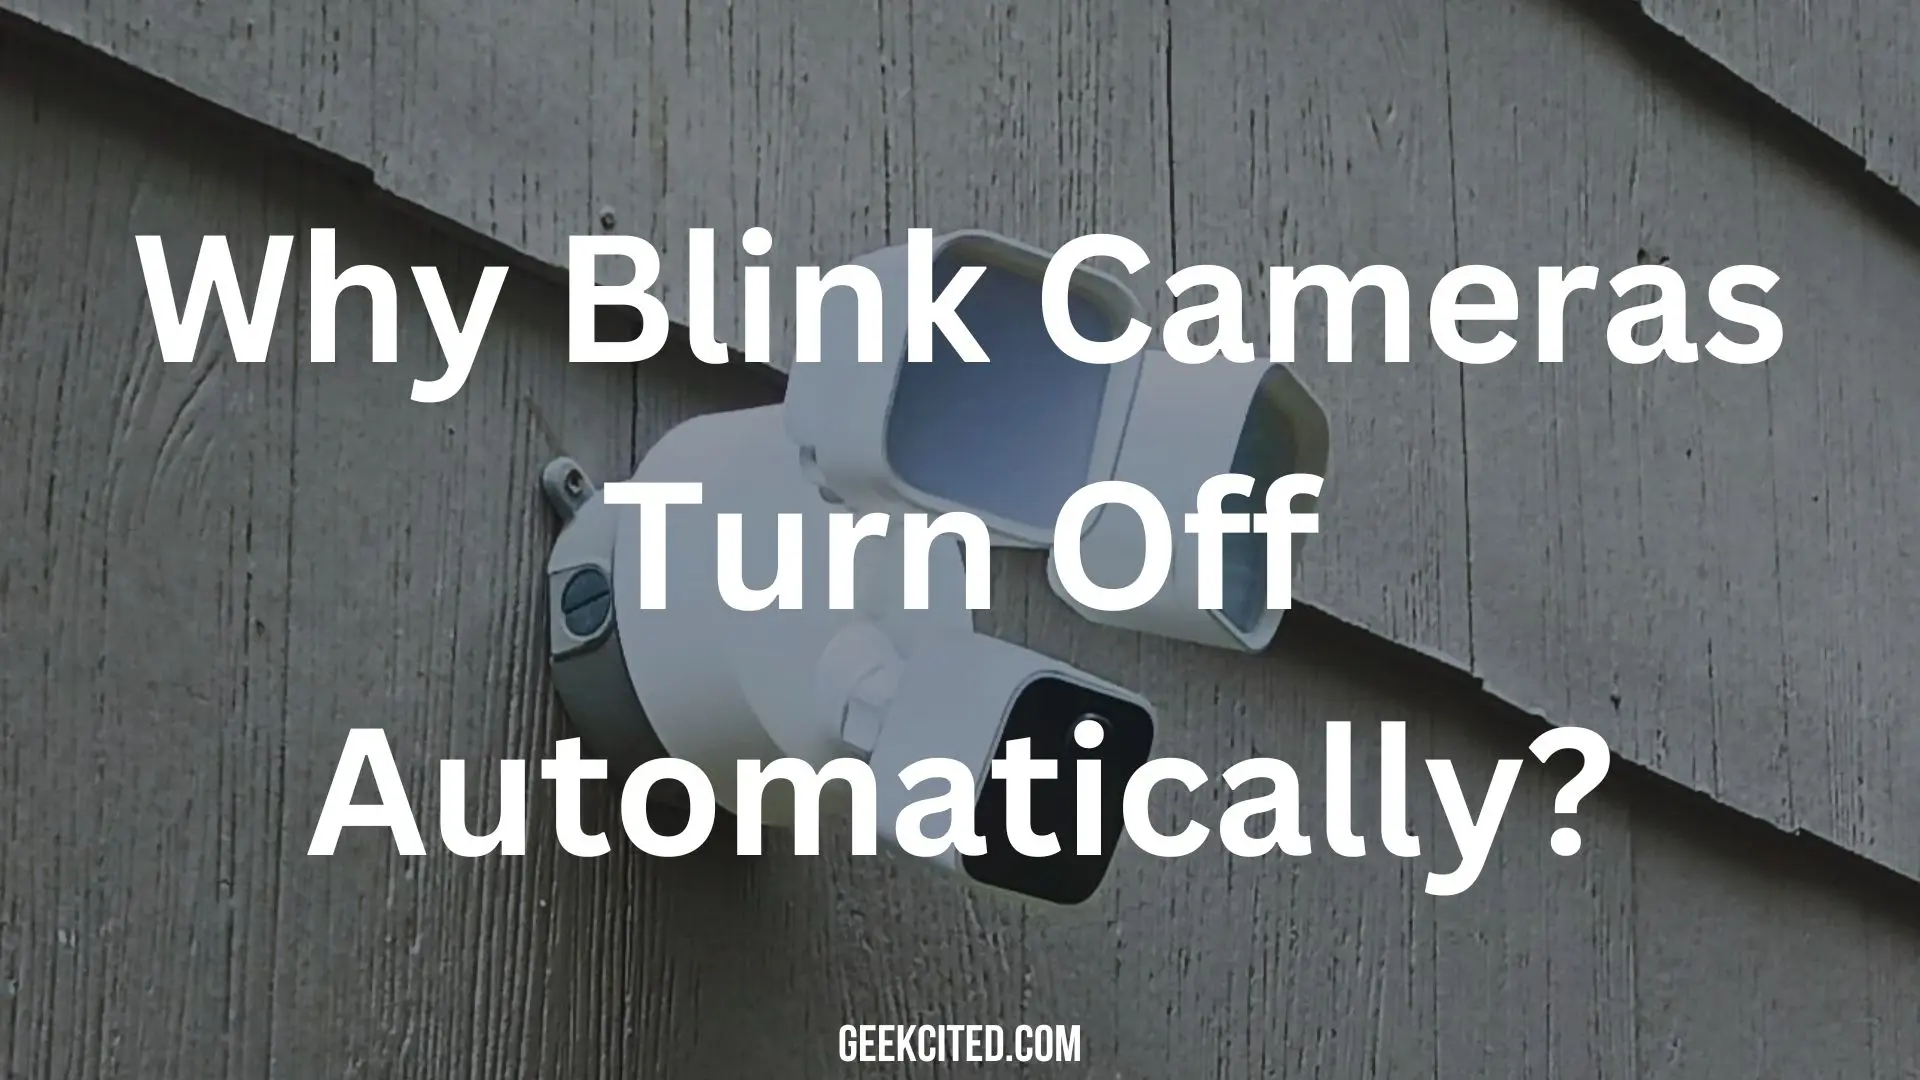 Why Blink Cameras Turn Off Automatically